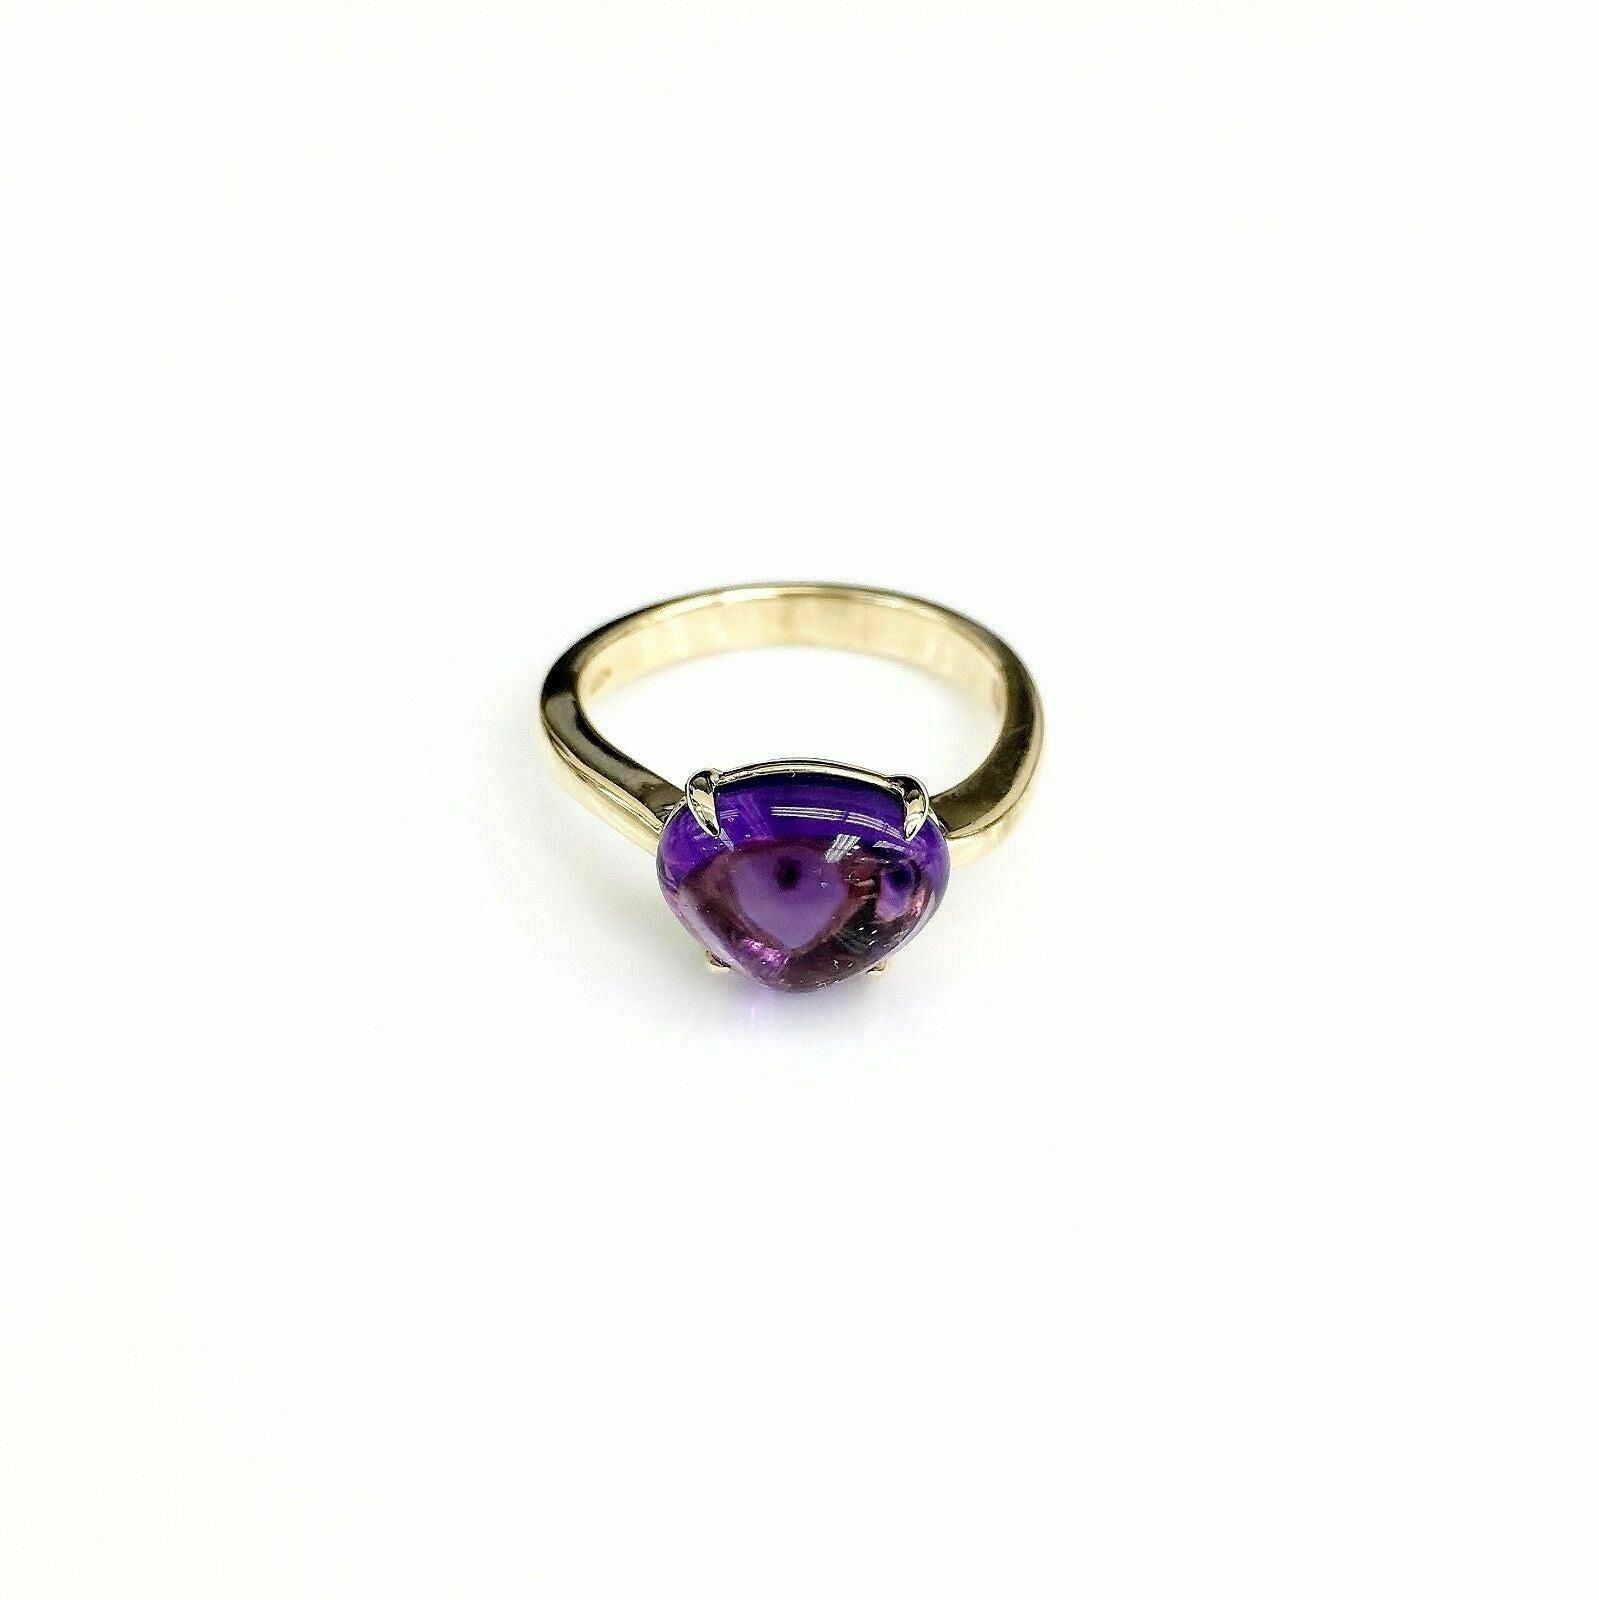 Authentic Bvlgari Solid 18 Karat Gold Sassi Amethyst Ring with Box Made in Italy